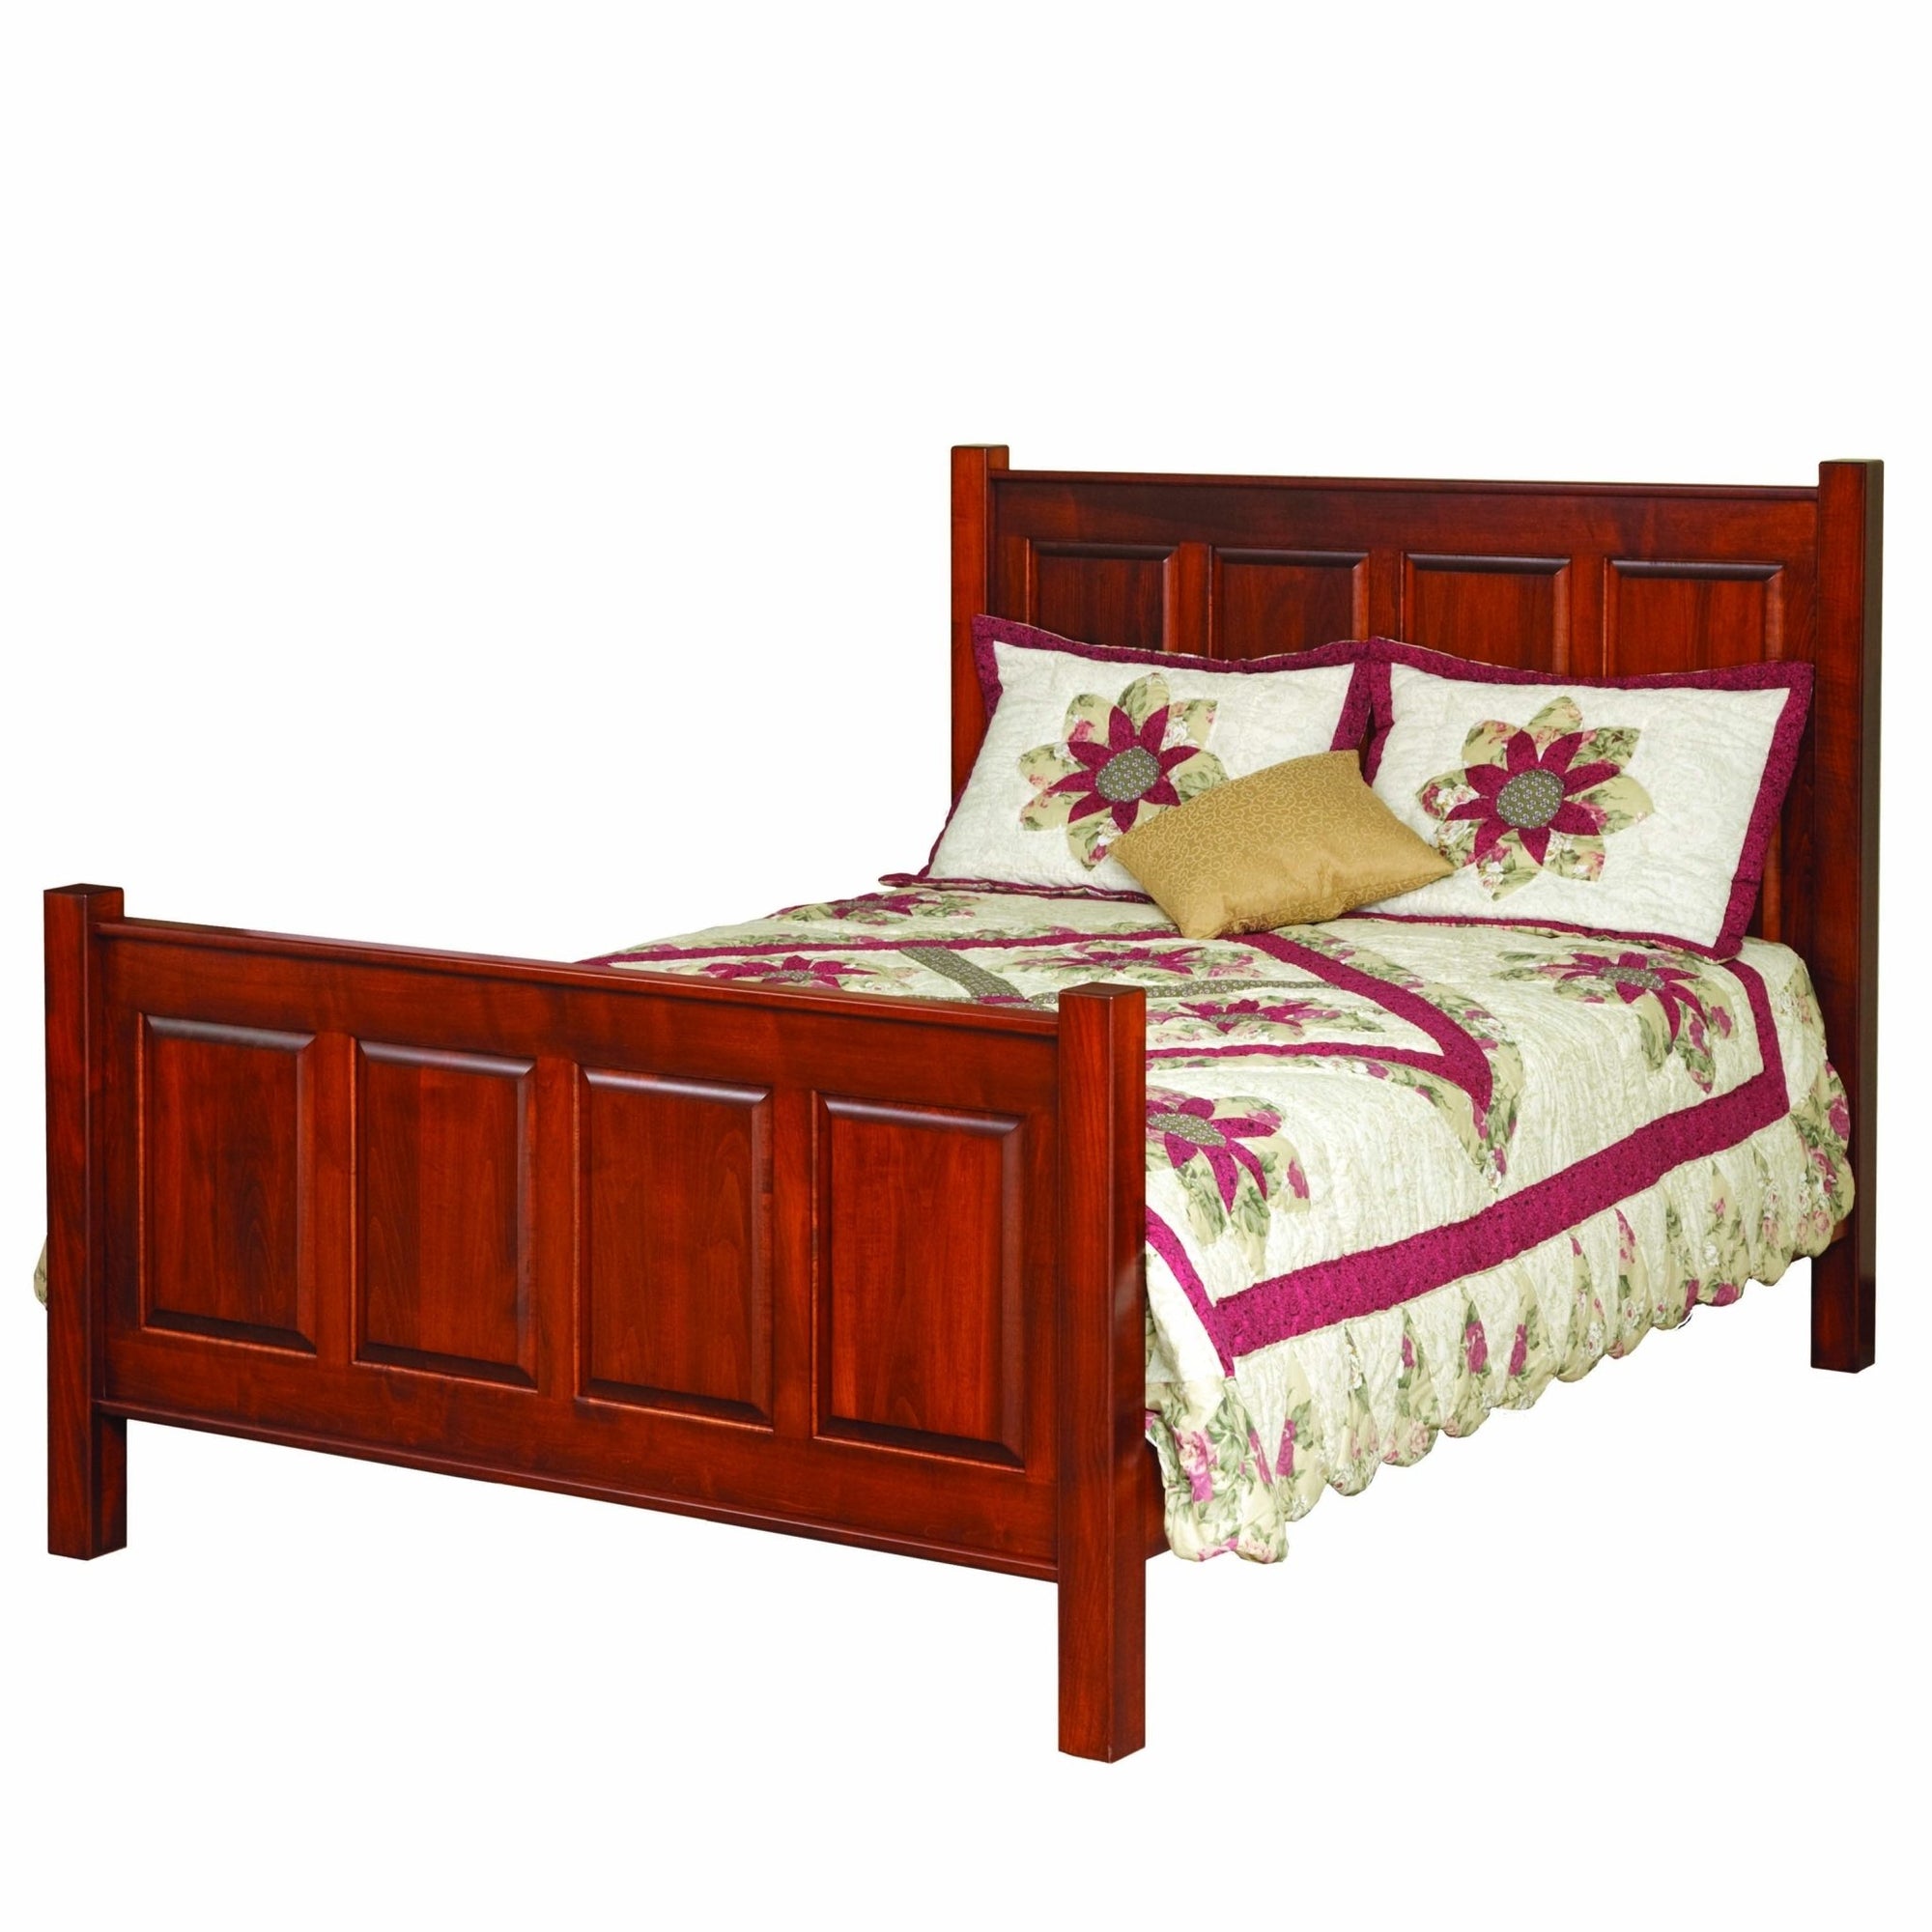 Plymouth Bed - snyders.furniture